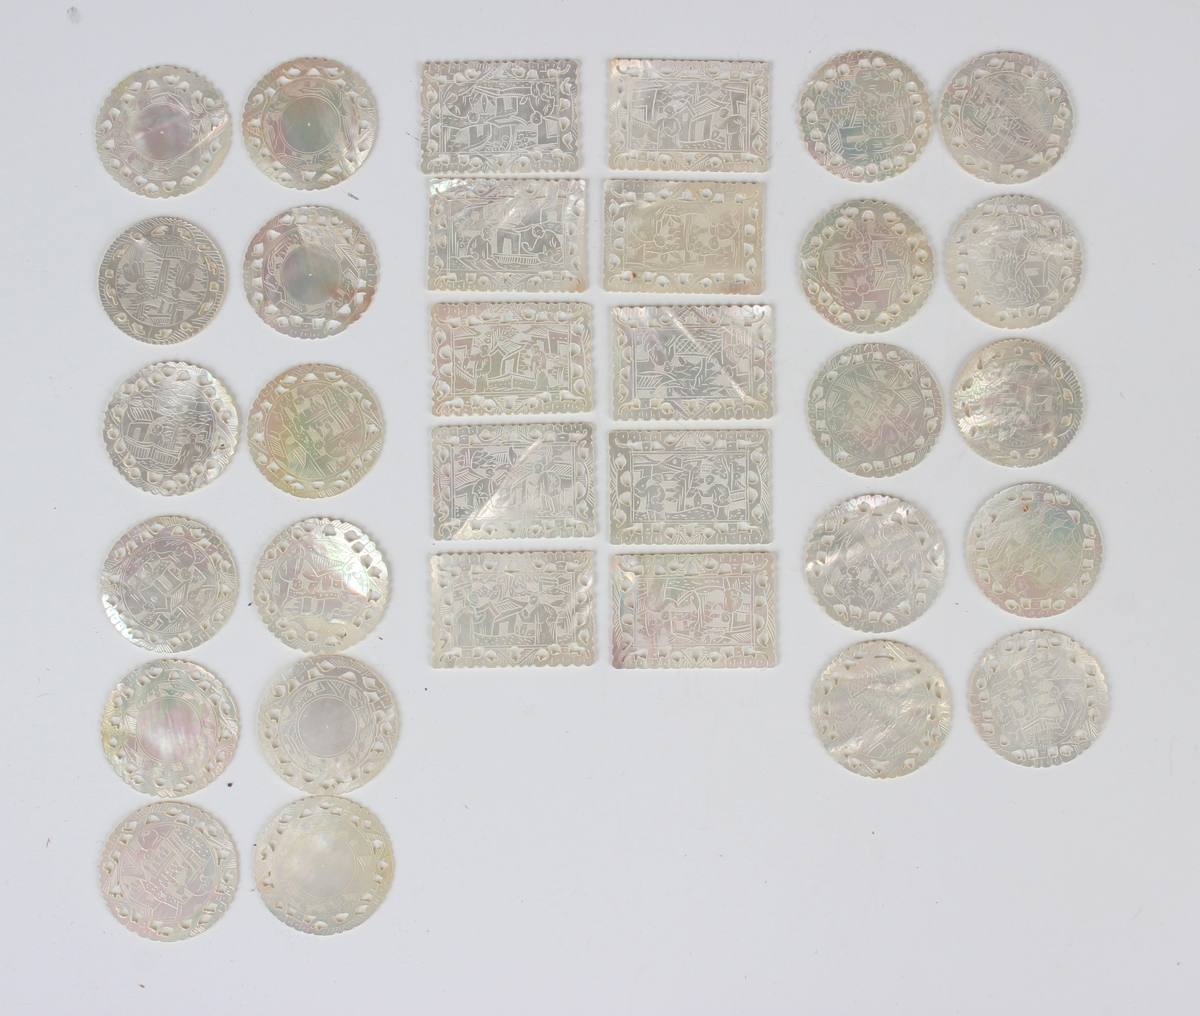 A set of Chinese Canton export mother-of-pearl gaming counters, mid to late 19th century, each - Image 9 of 10